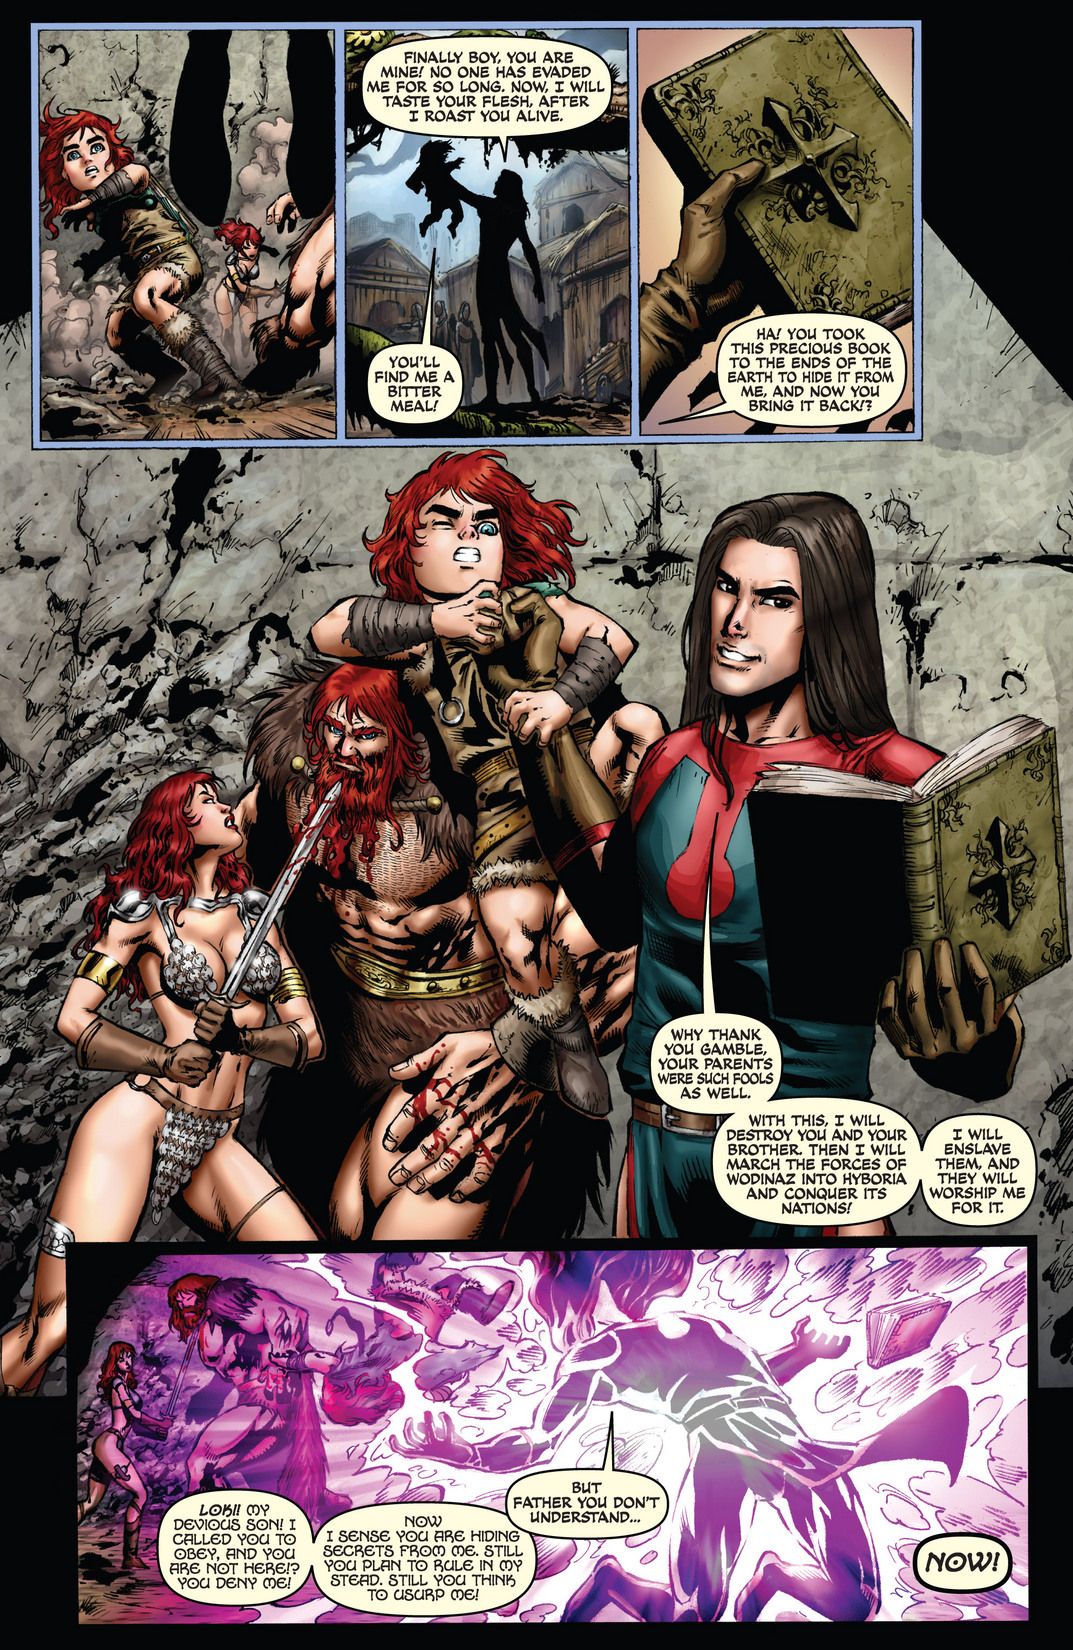 Red Sonja: Wrath Of The Gods Backgrounds, Compatible - PC, Mobile, Gadgets| 1073x1650 px